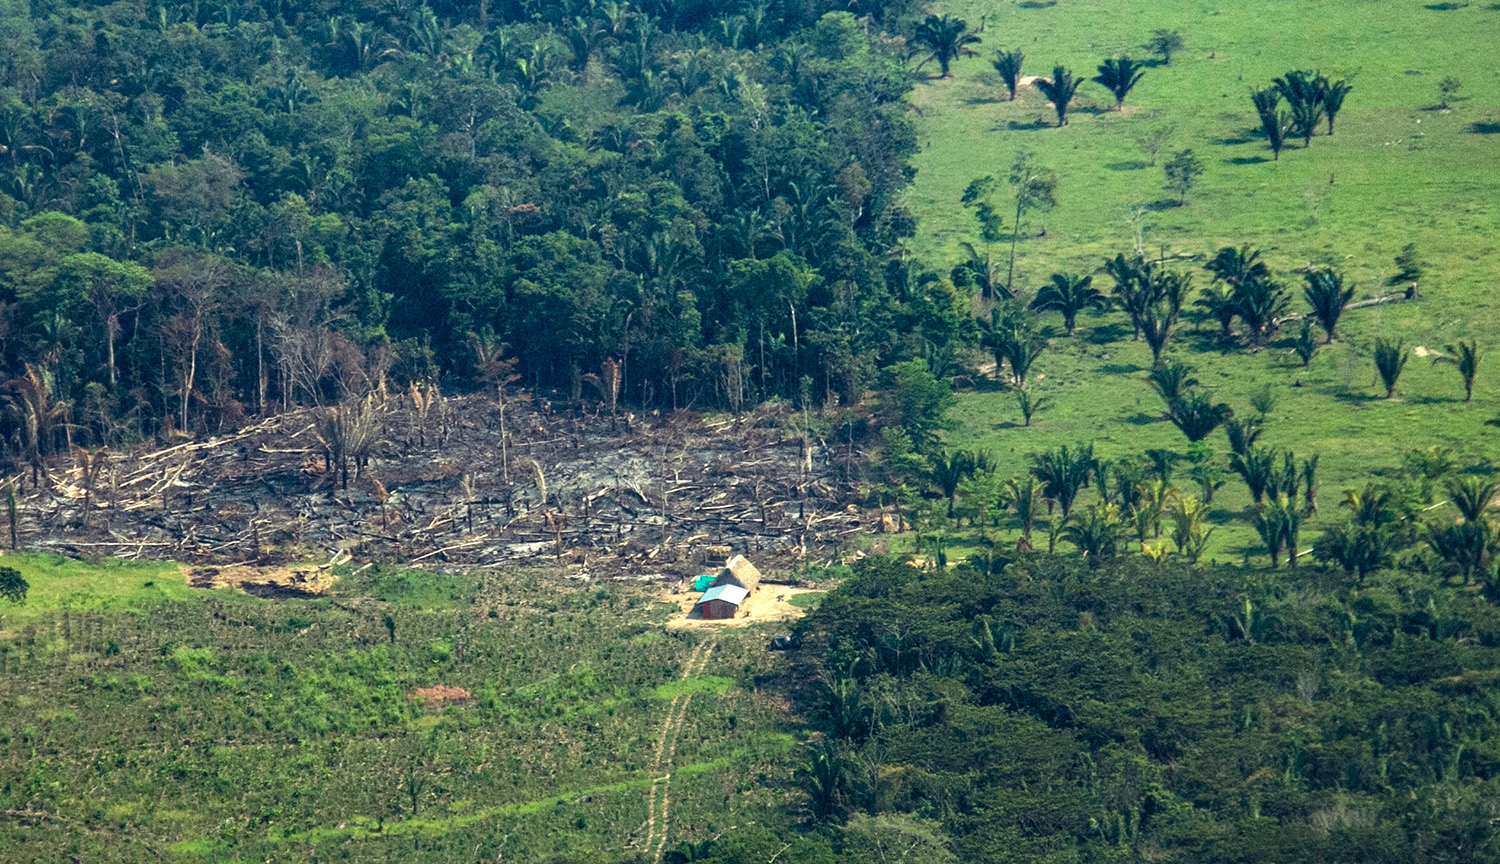 Panoramic image of a fragment of Amazon forest with sectors of tree-covered and deforested land as well as a section with remains of forest that was burned.